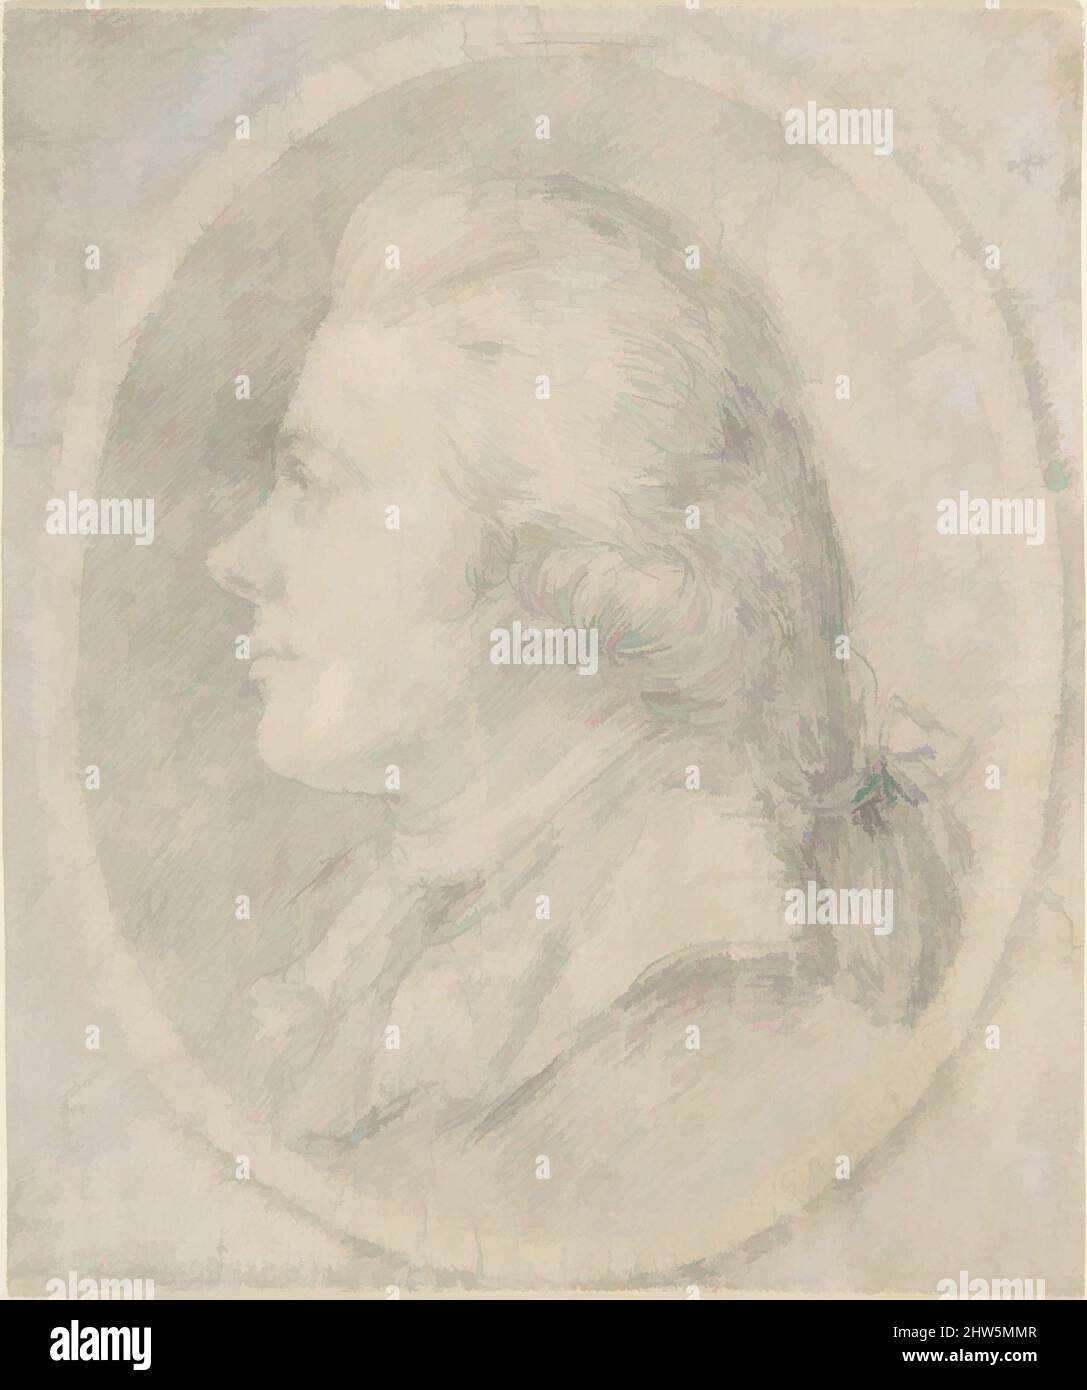 Art inspired by Portrait of a Man, 18th century, Graphite, 6 x 4 15/16 in. (15.2 x 12.6 cm), Drawings, Attributed to Gabriel de Saint-Aubin (French, Paris 1724–1780 Paris, Classic works modernized by Artotop with a splash of modernity. Shapes, color and value, eye-catching visual impact on art. Emotions through freedom of artworks in a contemporary way. A timeless message pursuing a wildly creative new direction. Artists turning to the digital medium and creating the Artotop NFT Stock Photo